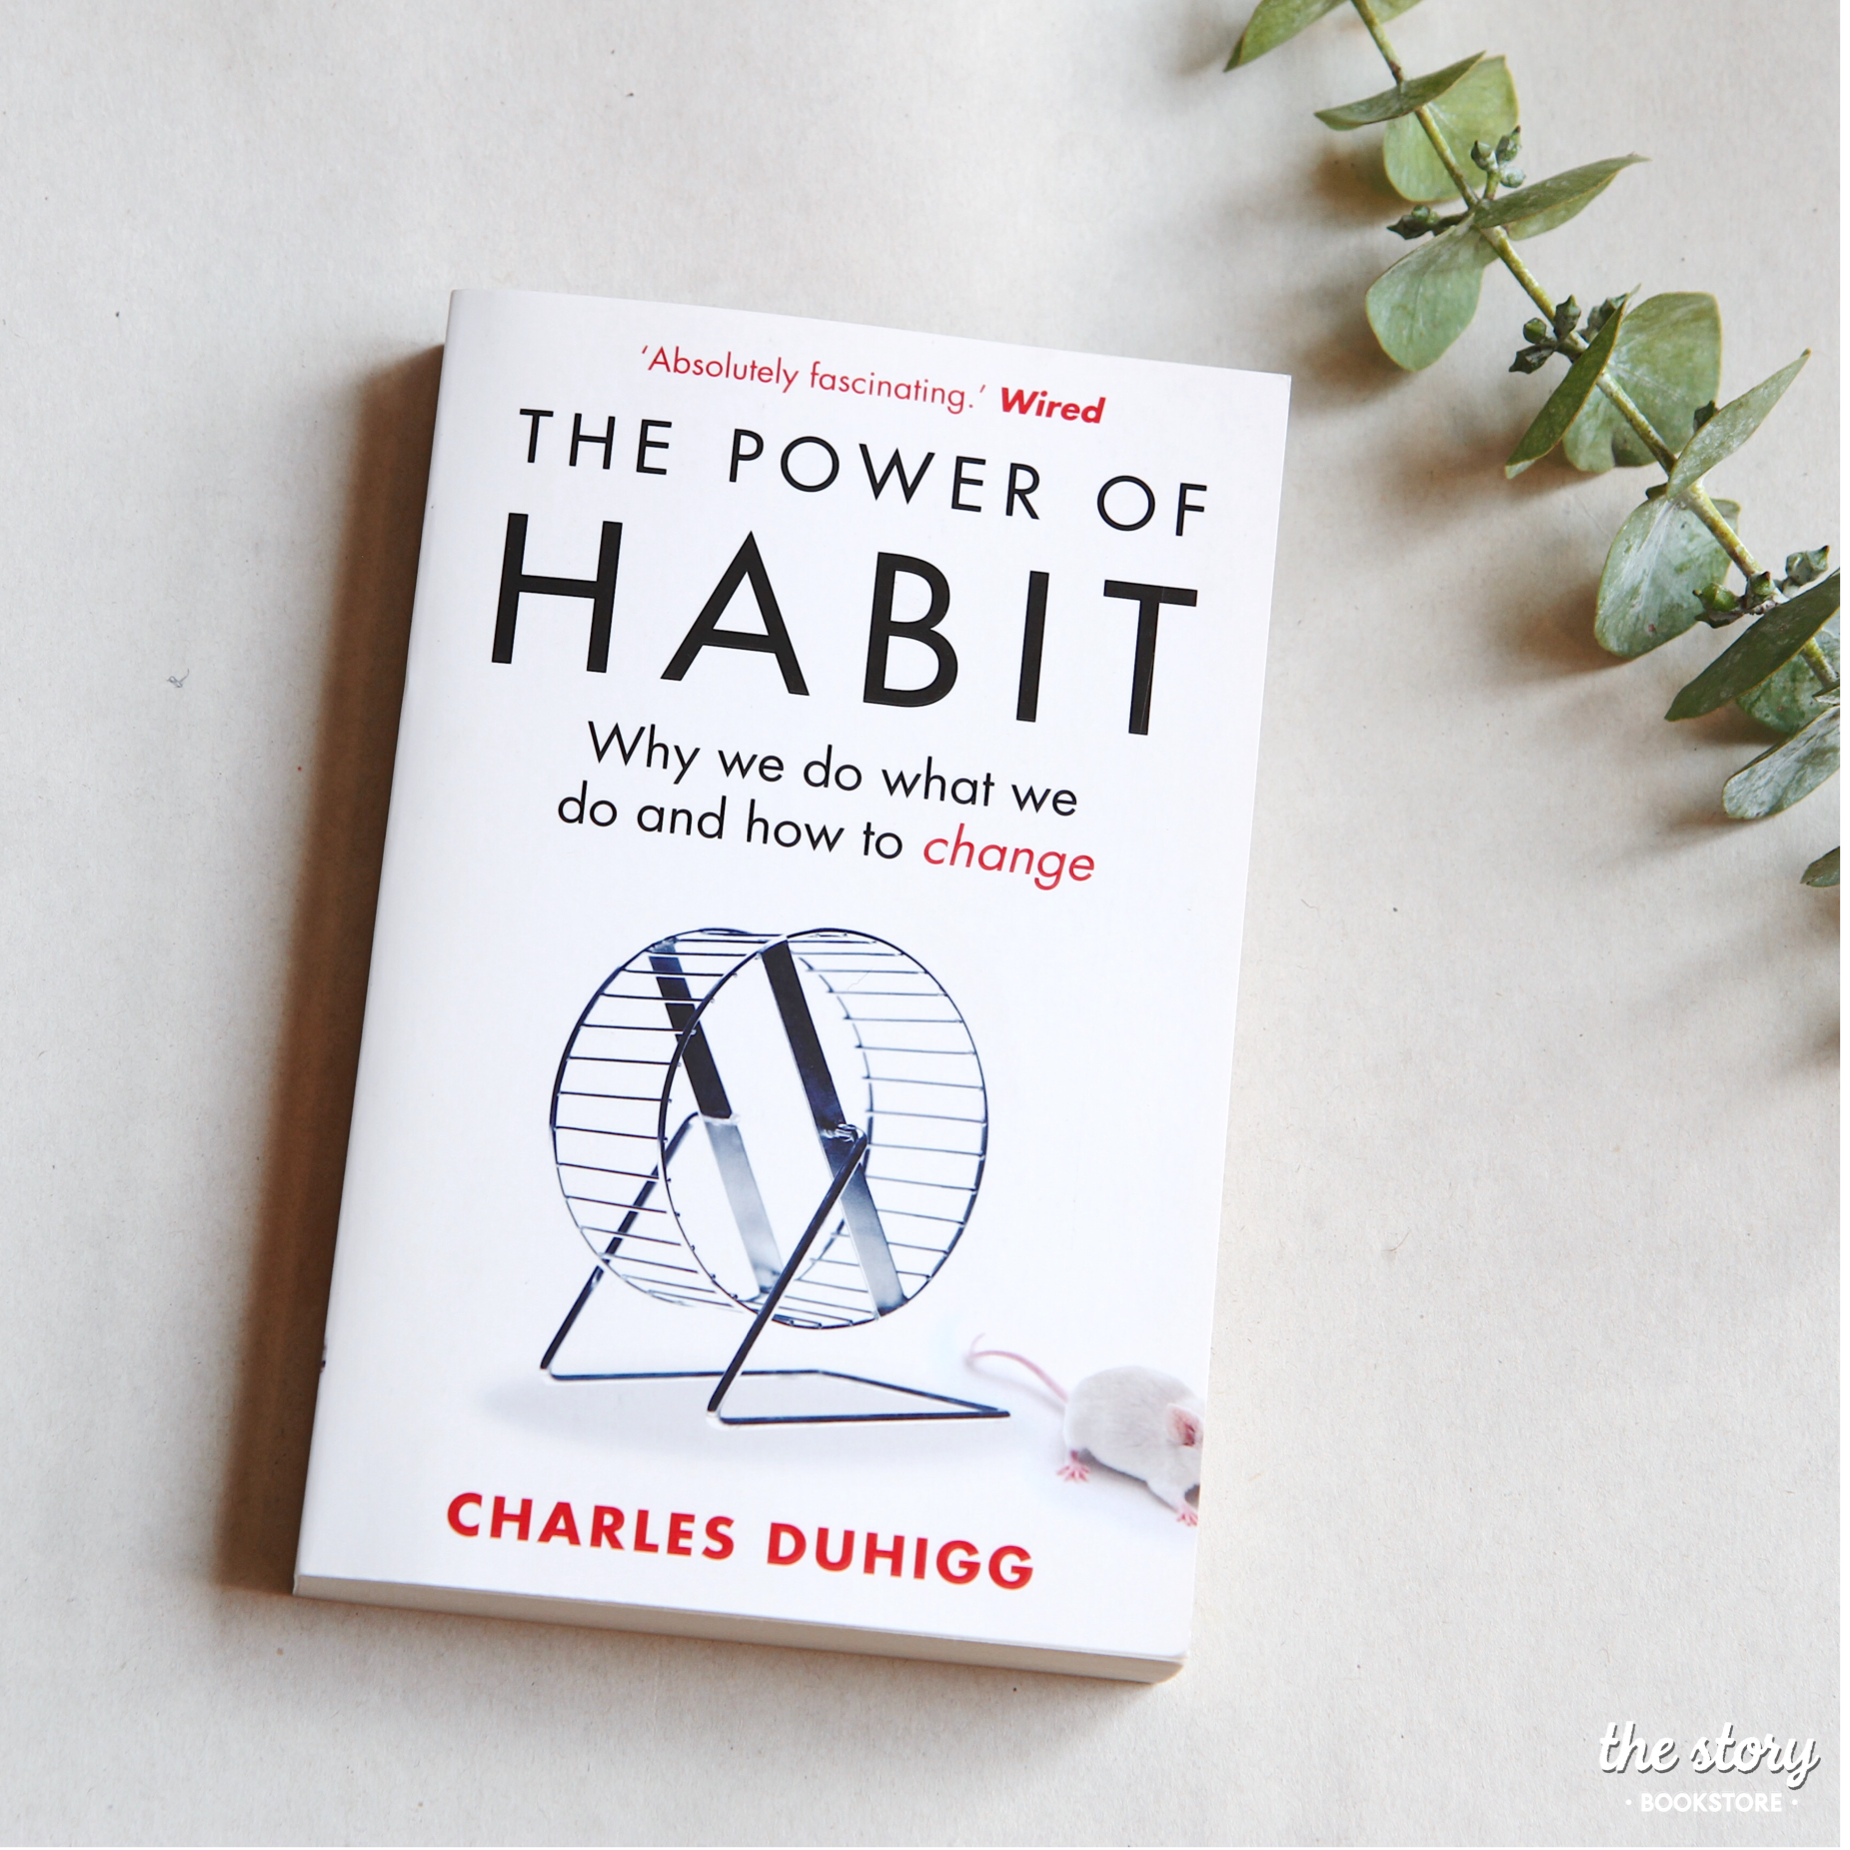 The Power Of Habit by Charles Duhigg